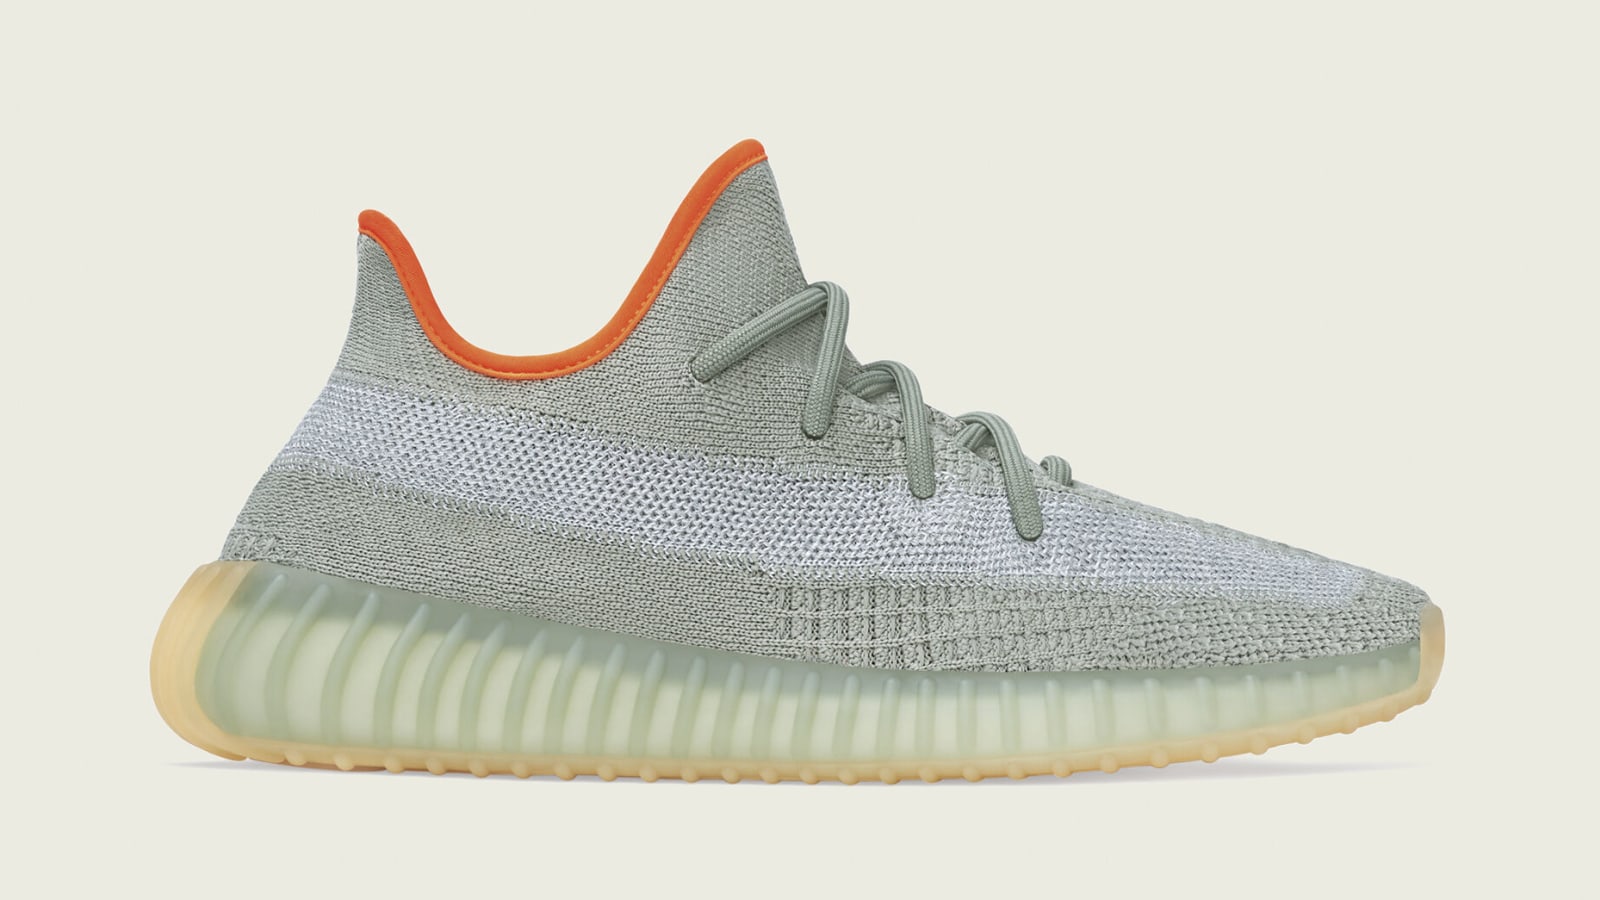 Adidas Yeezy Boost 350 V2 &quot;Desert Sage&quot; Officially Unveiled: Photos